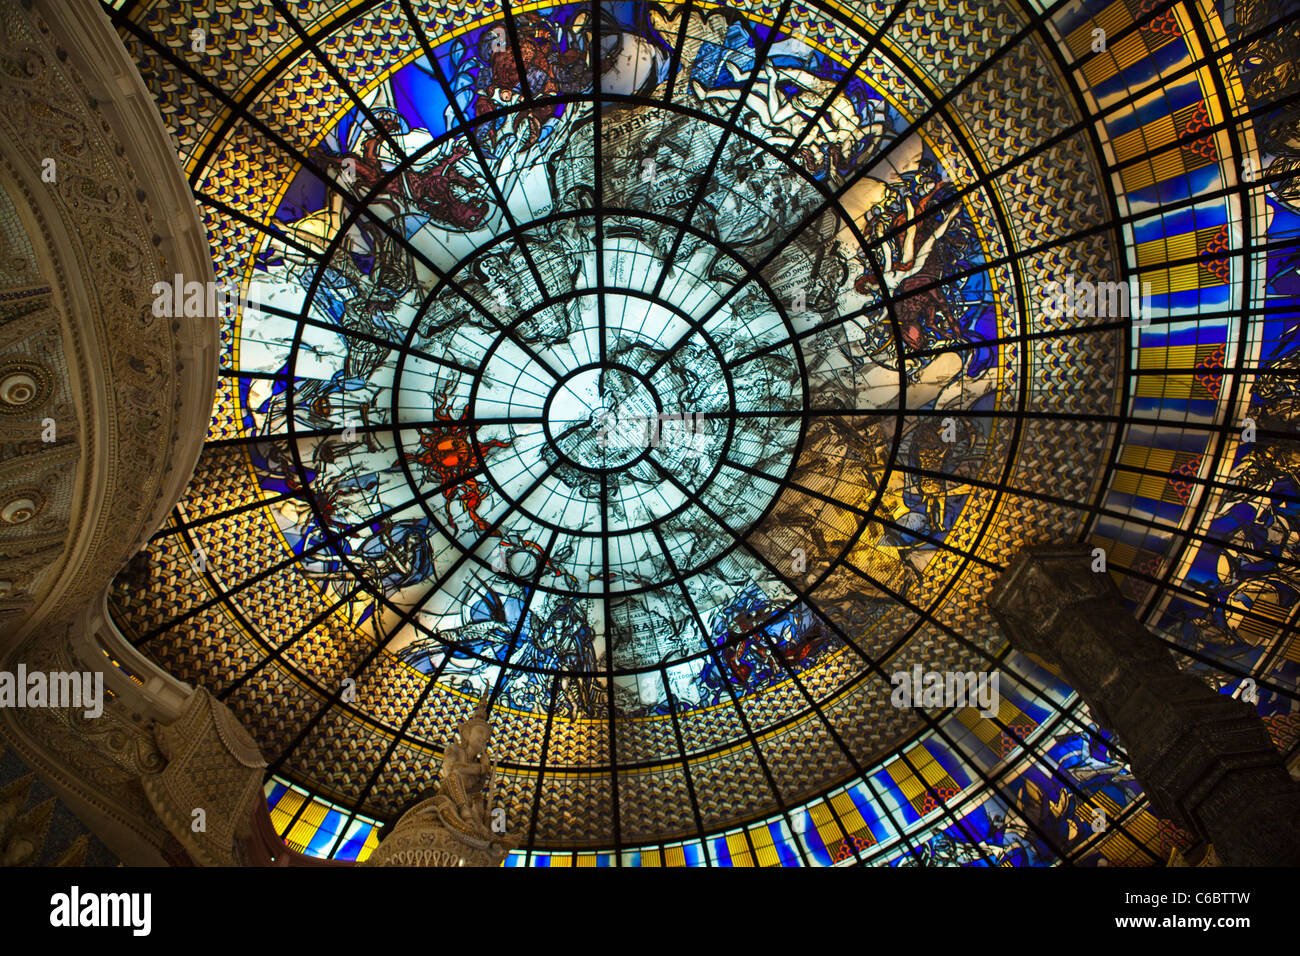 The stained glass ceiling at the Erawan Museum Stock Photo